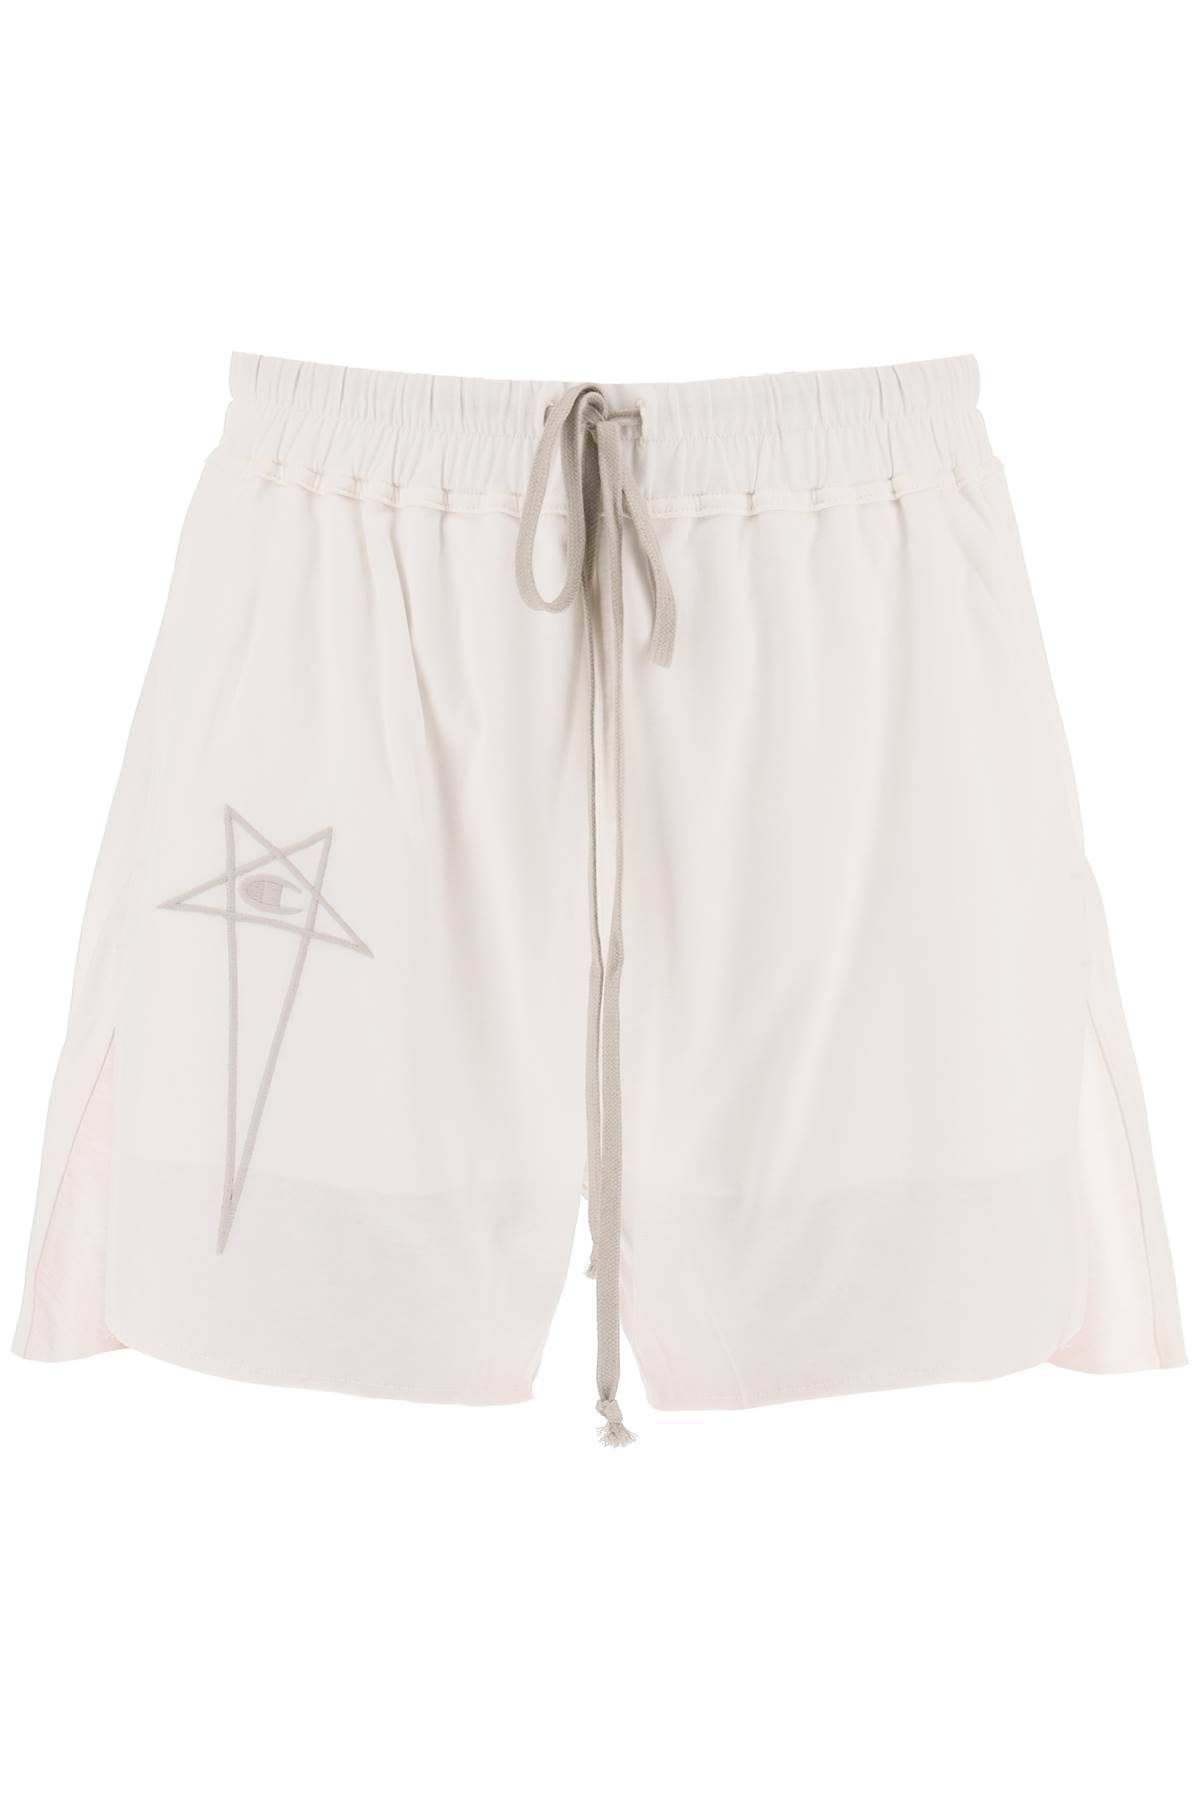 Rick Owens 'champion X ' Dolphin Cotton Shorts In White